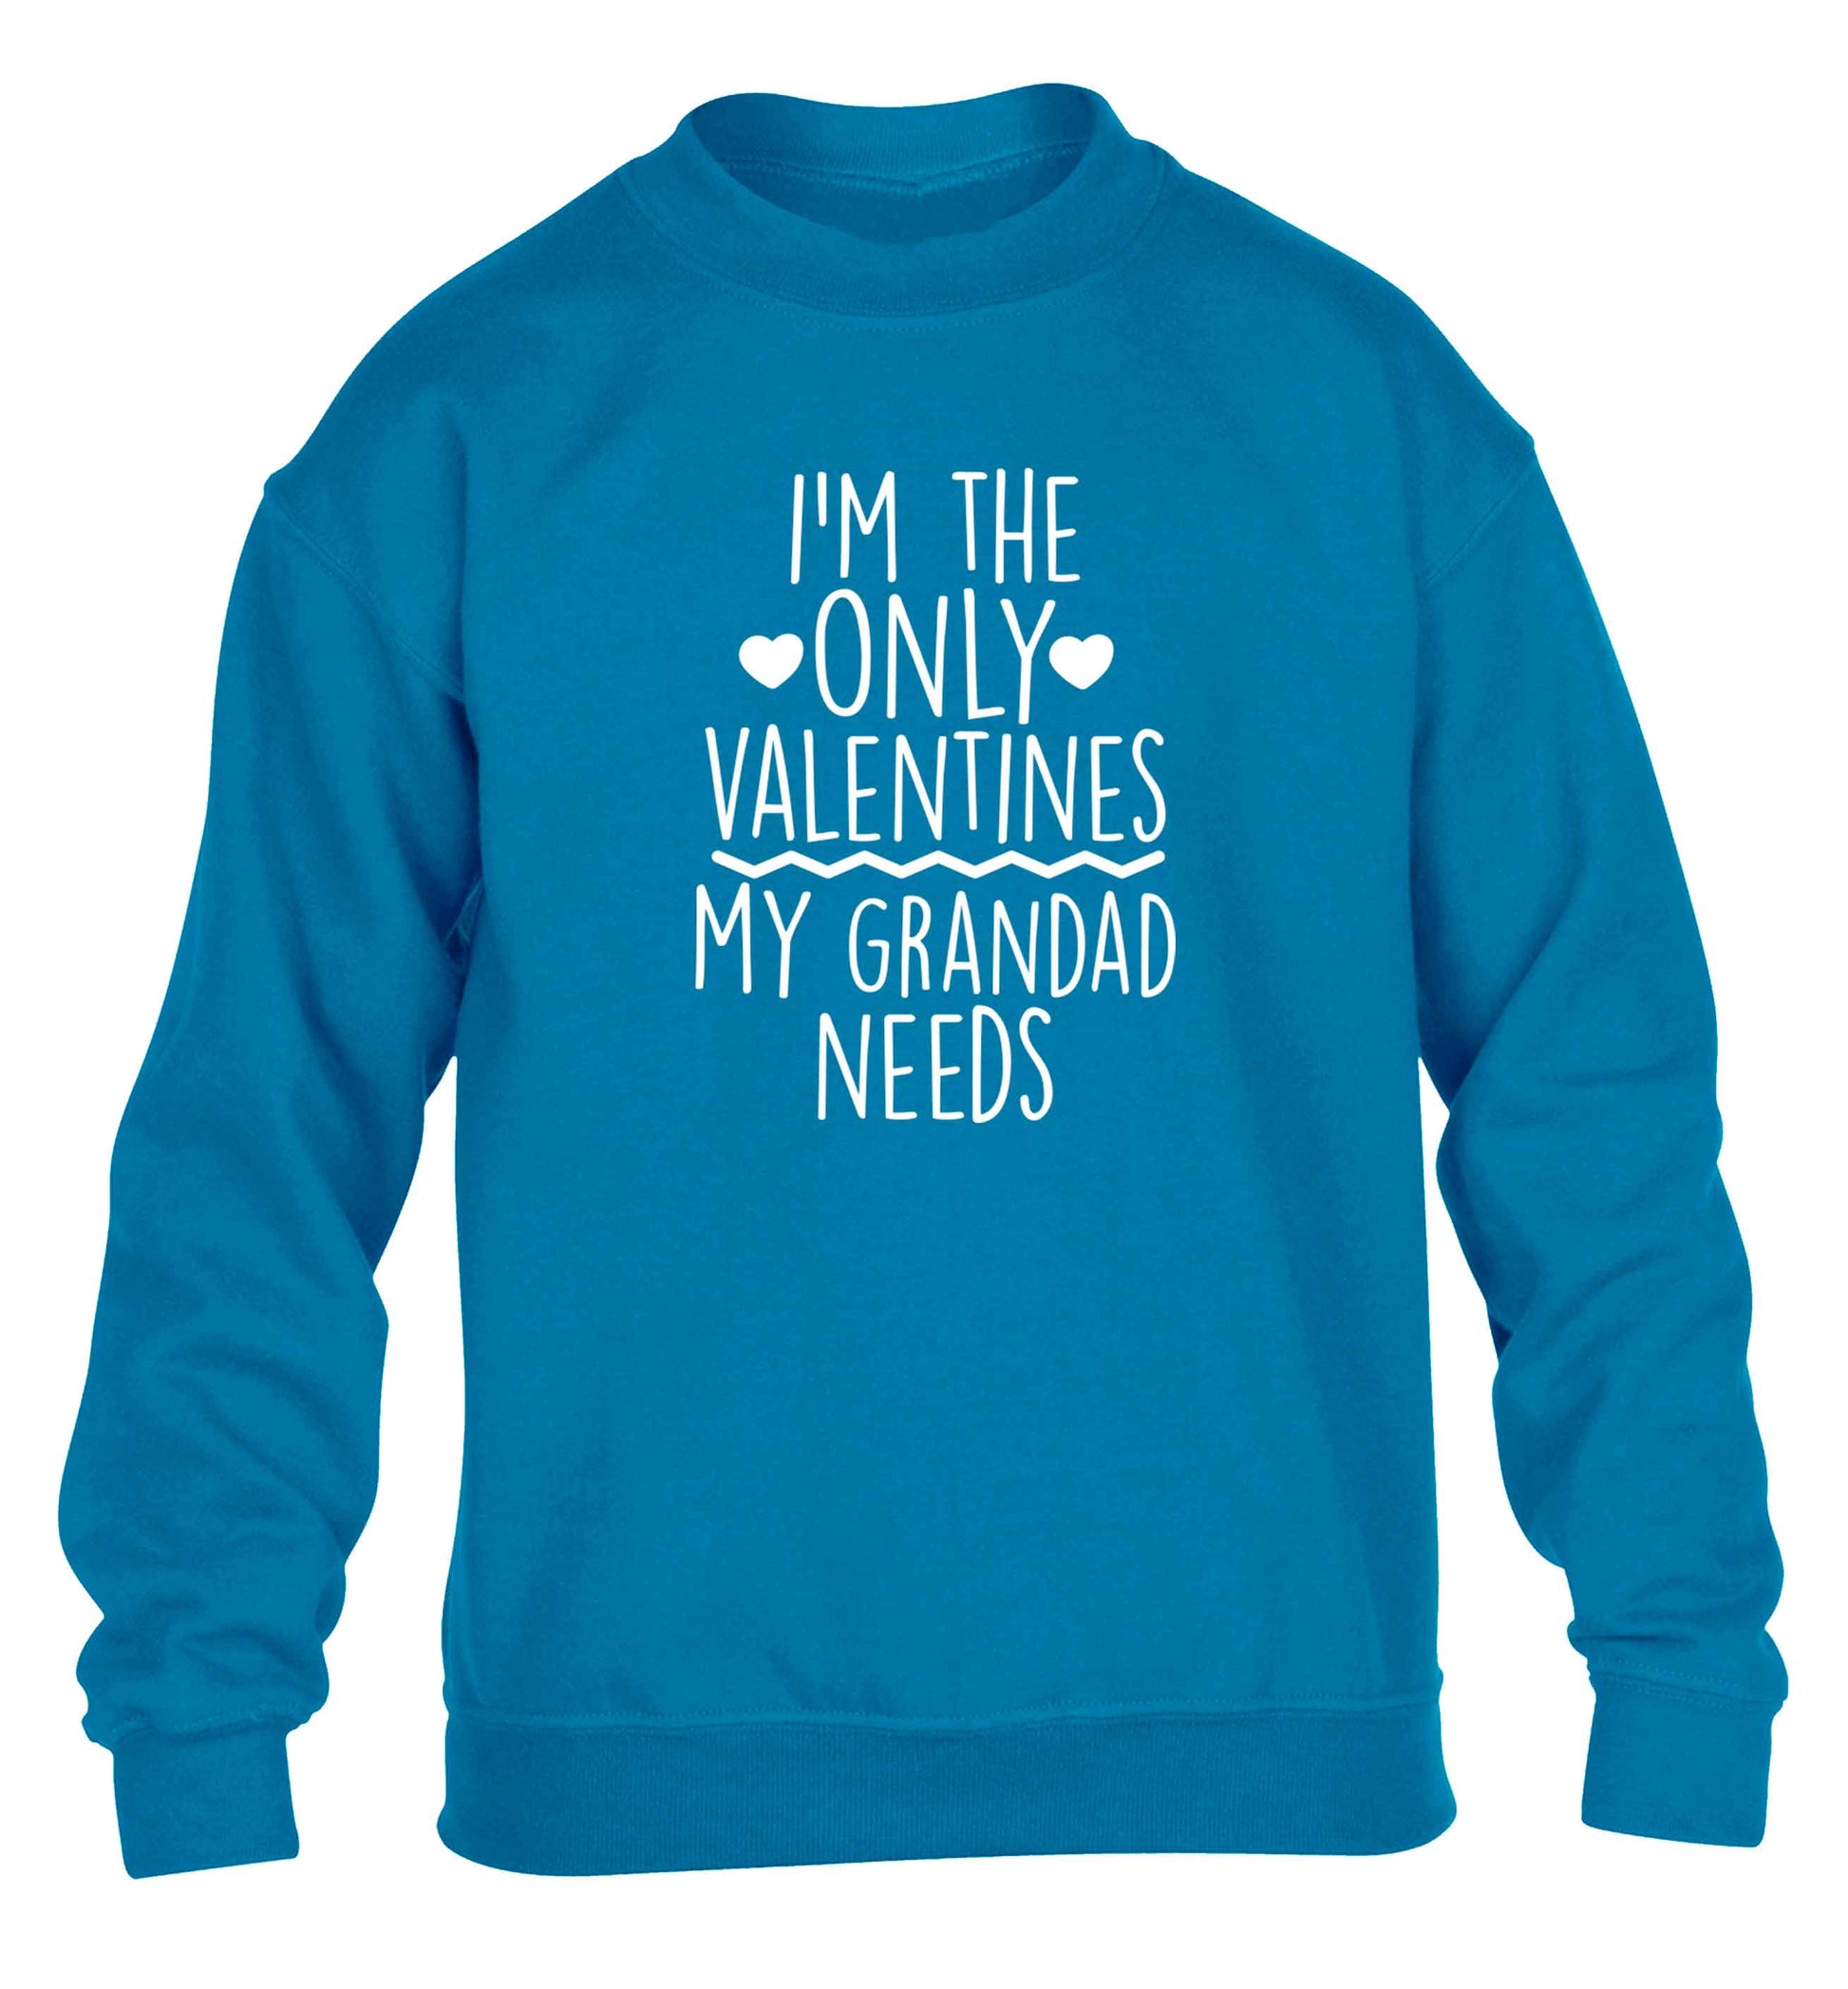 I'm the only valentines my grandad needs children's blue sweater 12-13 Years